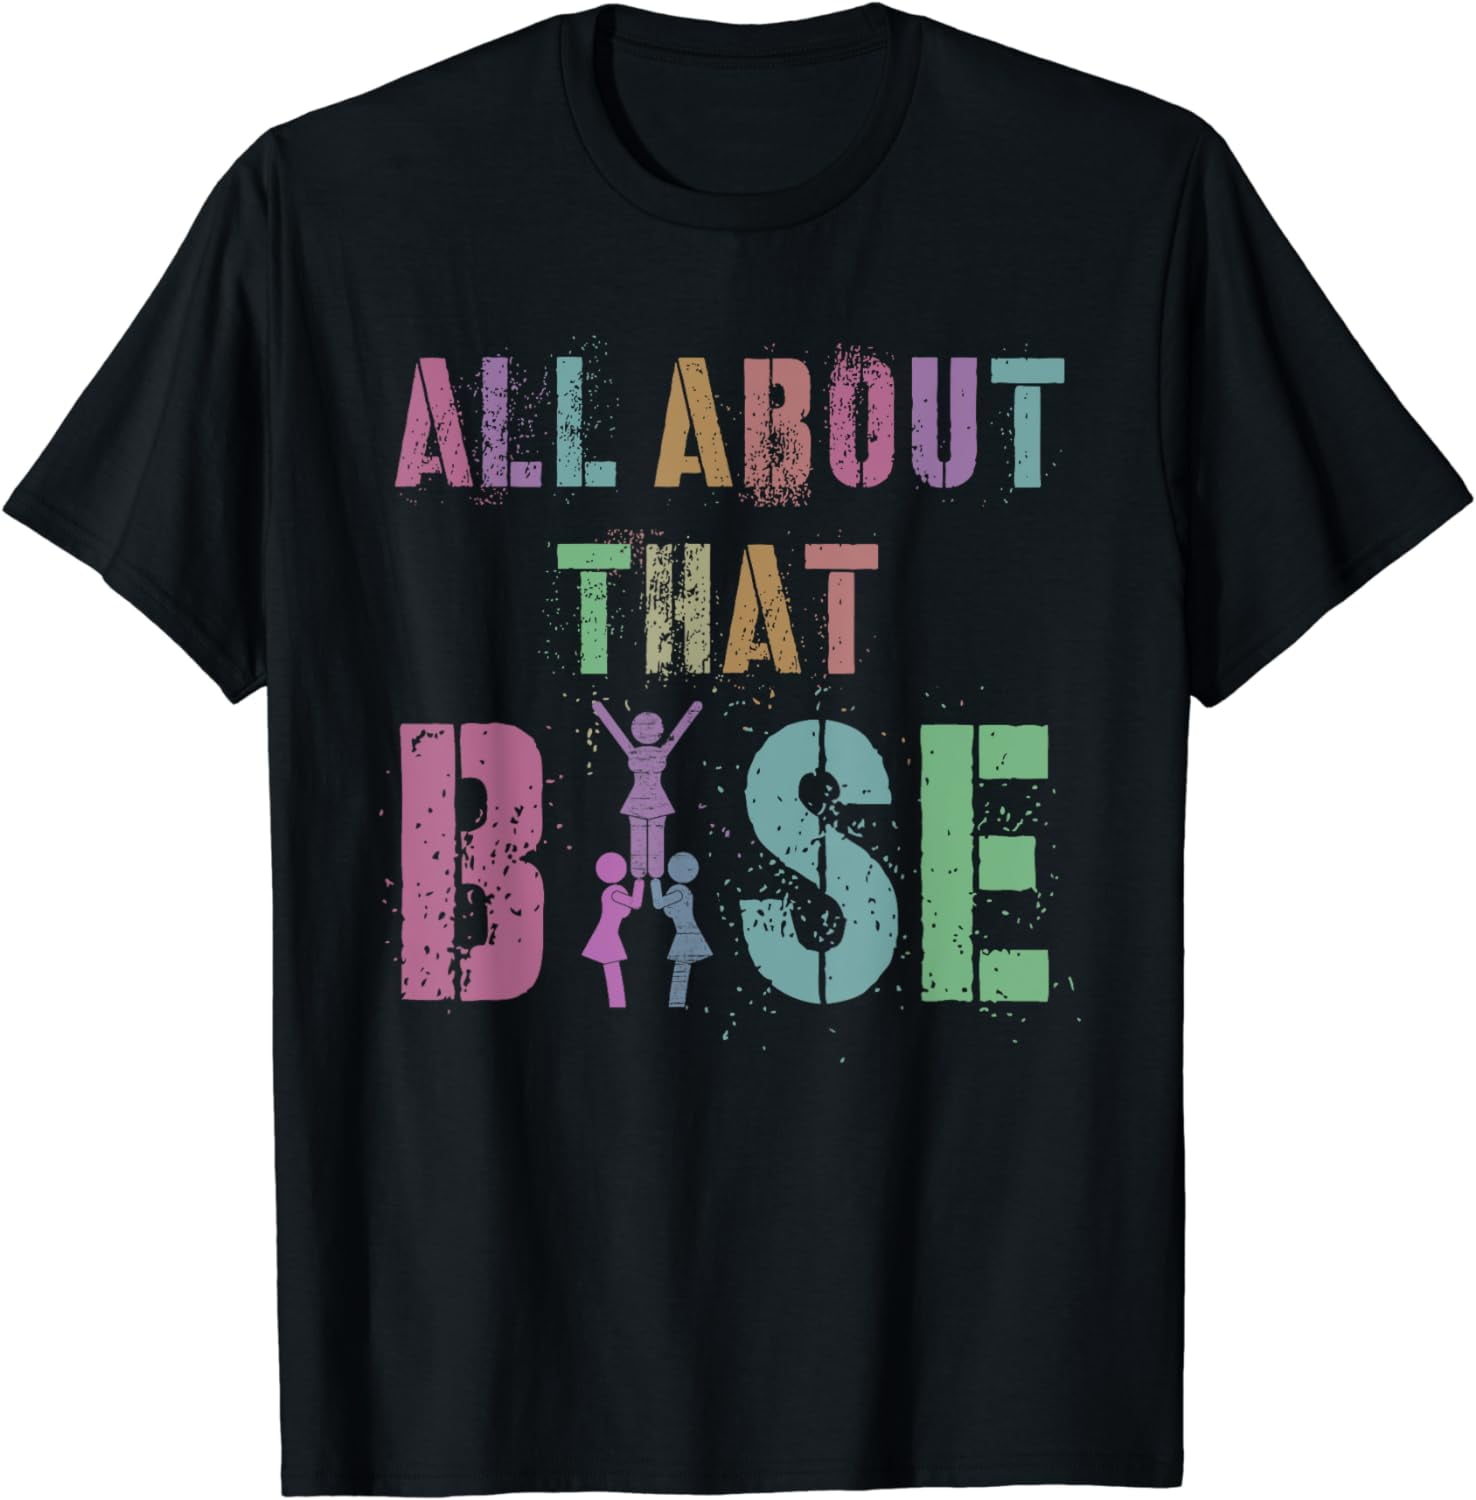 ALL ABOUT THAT BASE Cheerleading Team Cheer Squad T-Shirt - Walmart.com